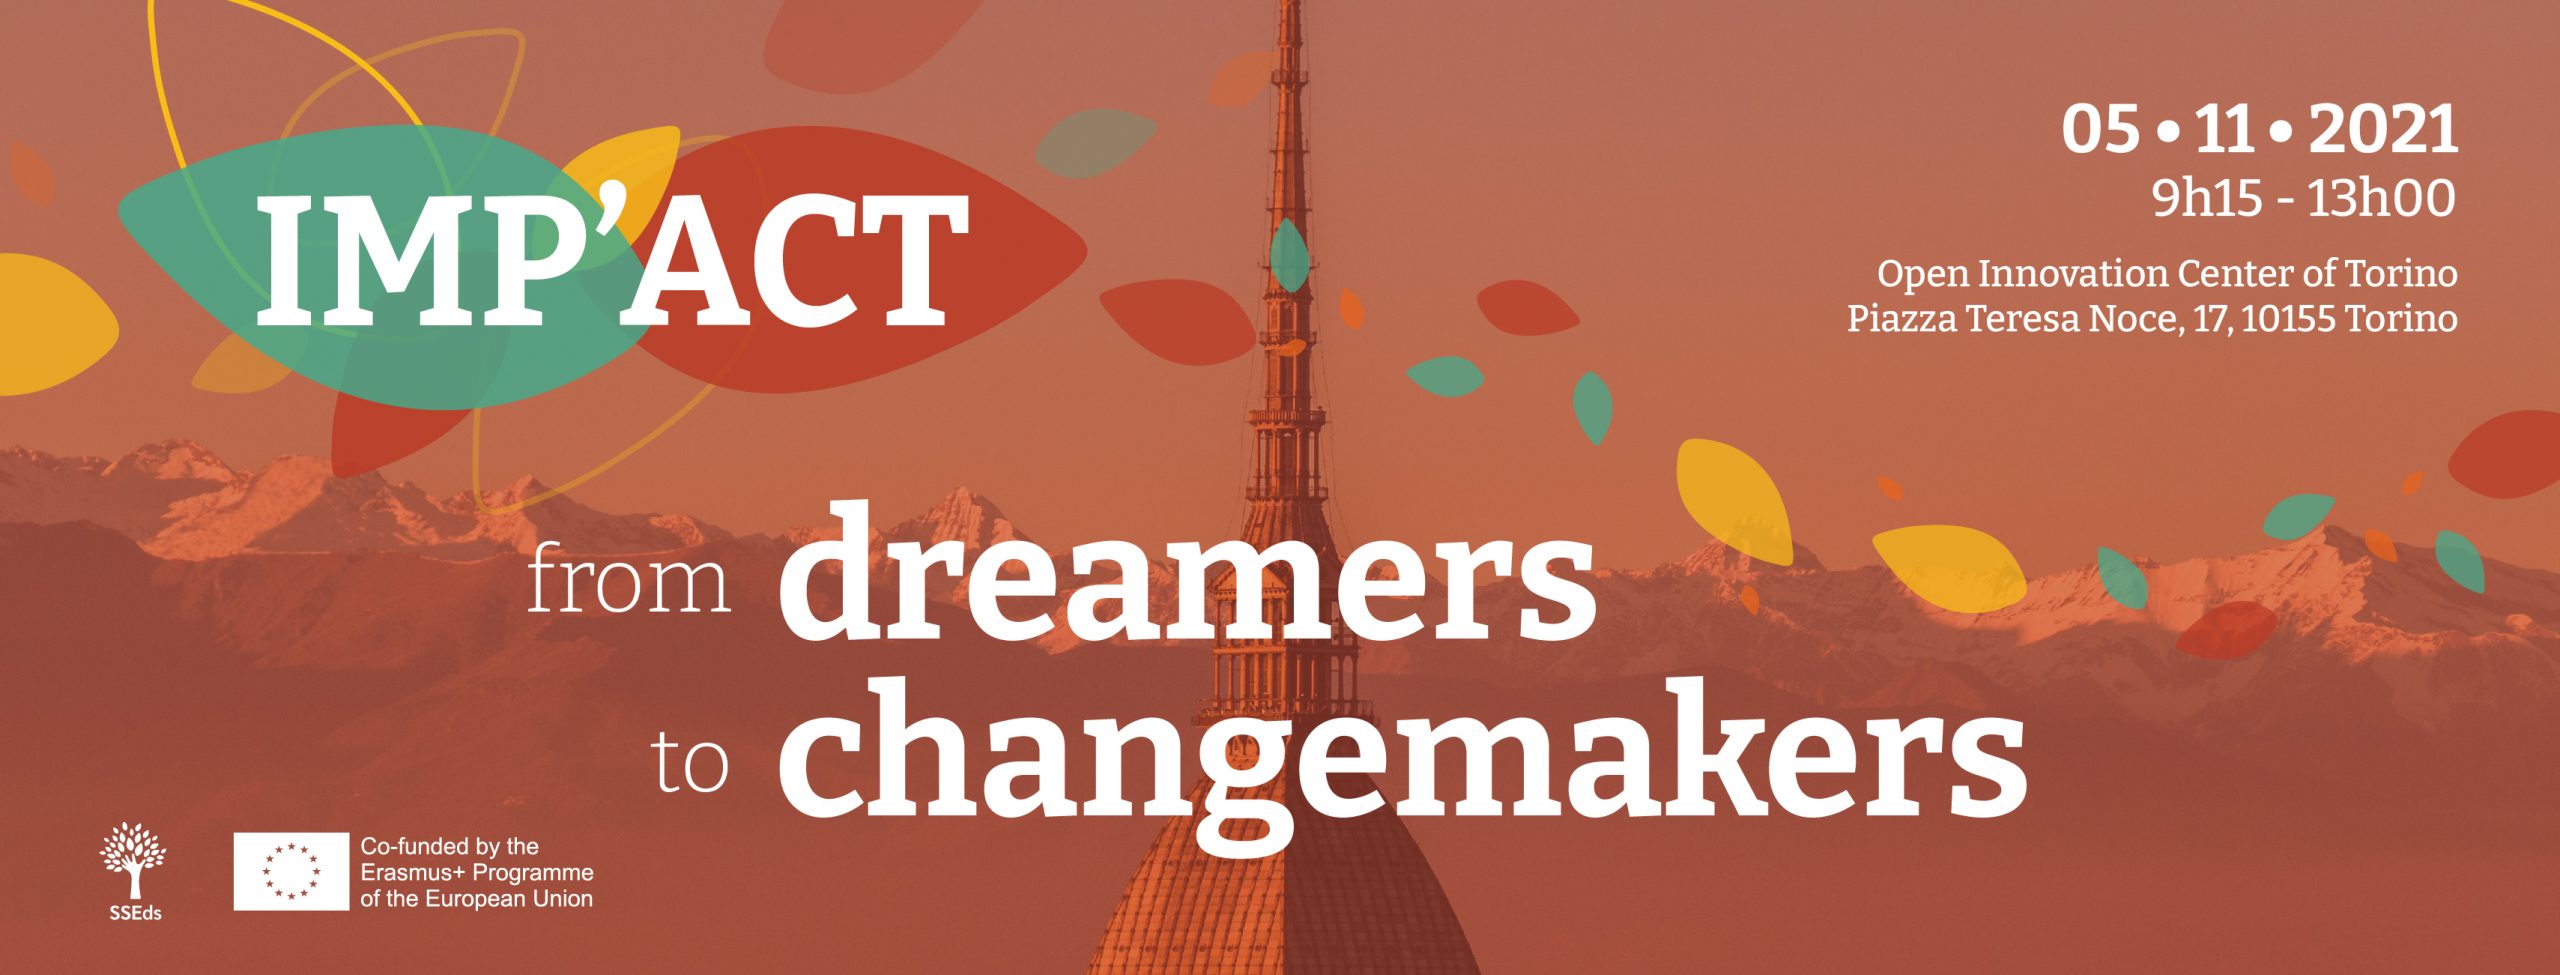 Imp’ACT – From dreamers to changemakers